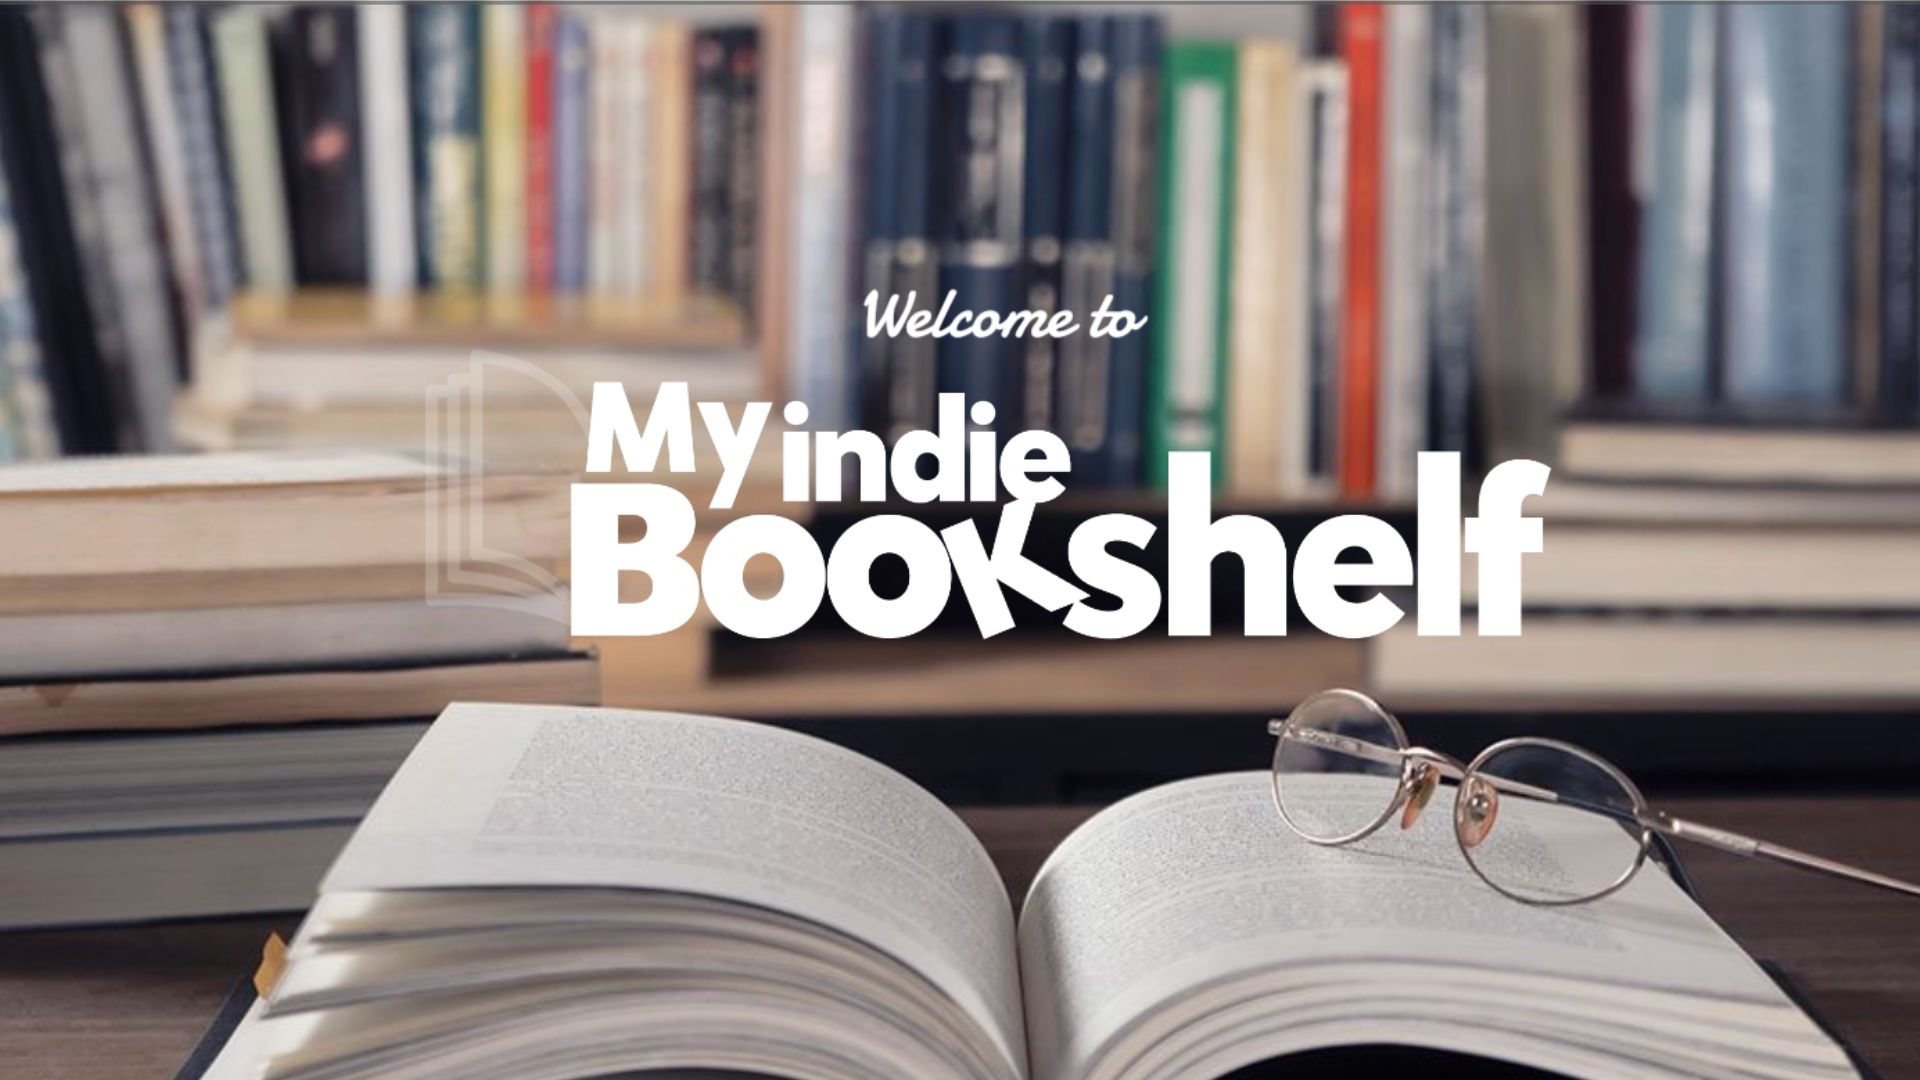 Check out My Indie Bookshelf!